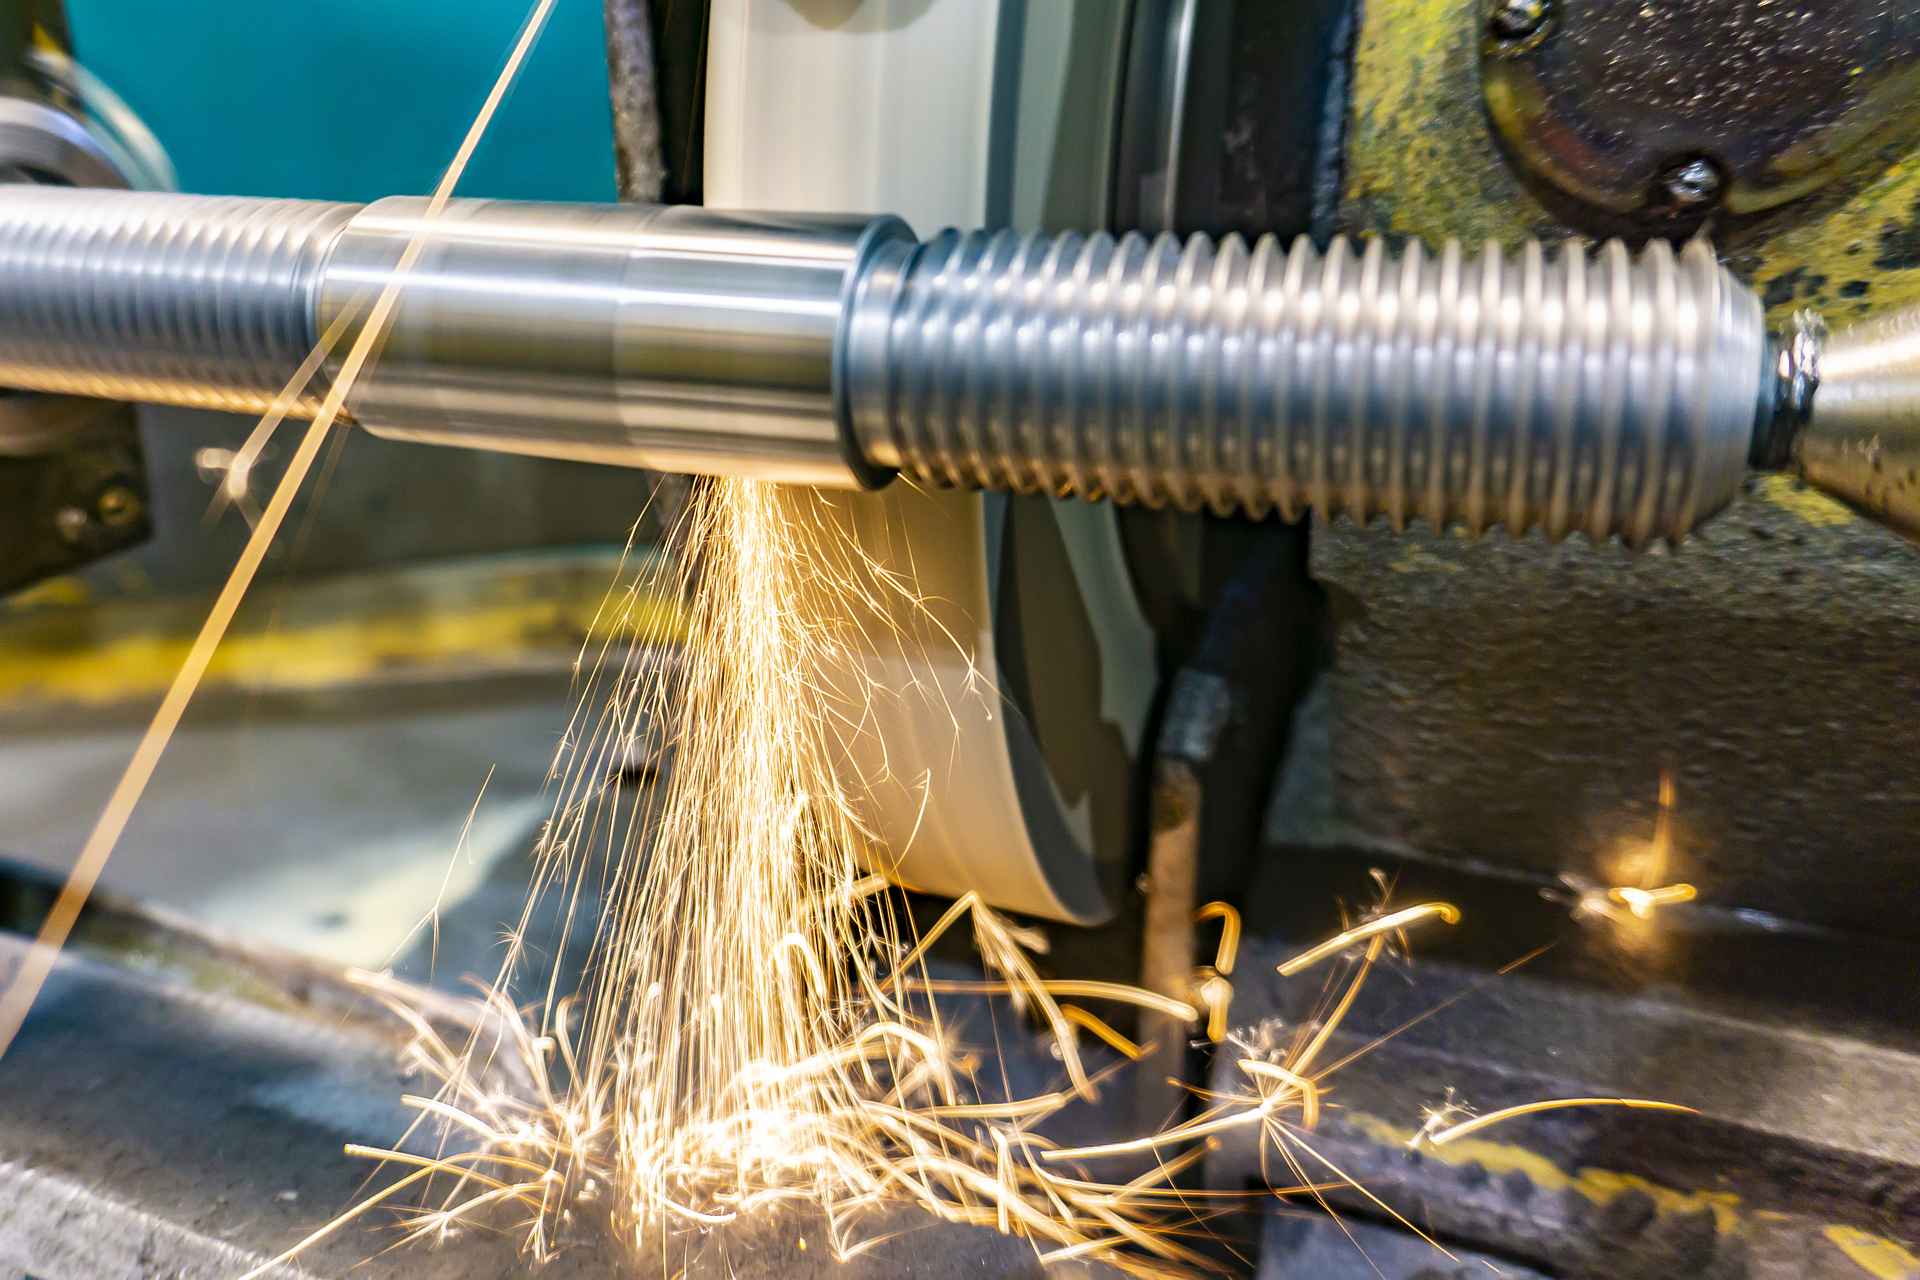 grinding a threaded shaft on a circular grinding machine with sparks